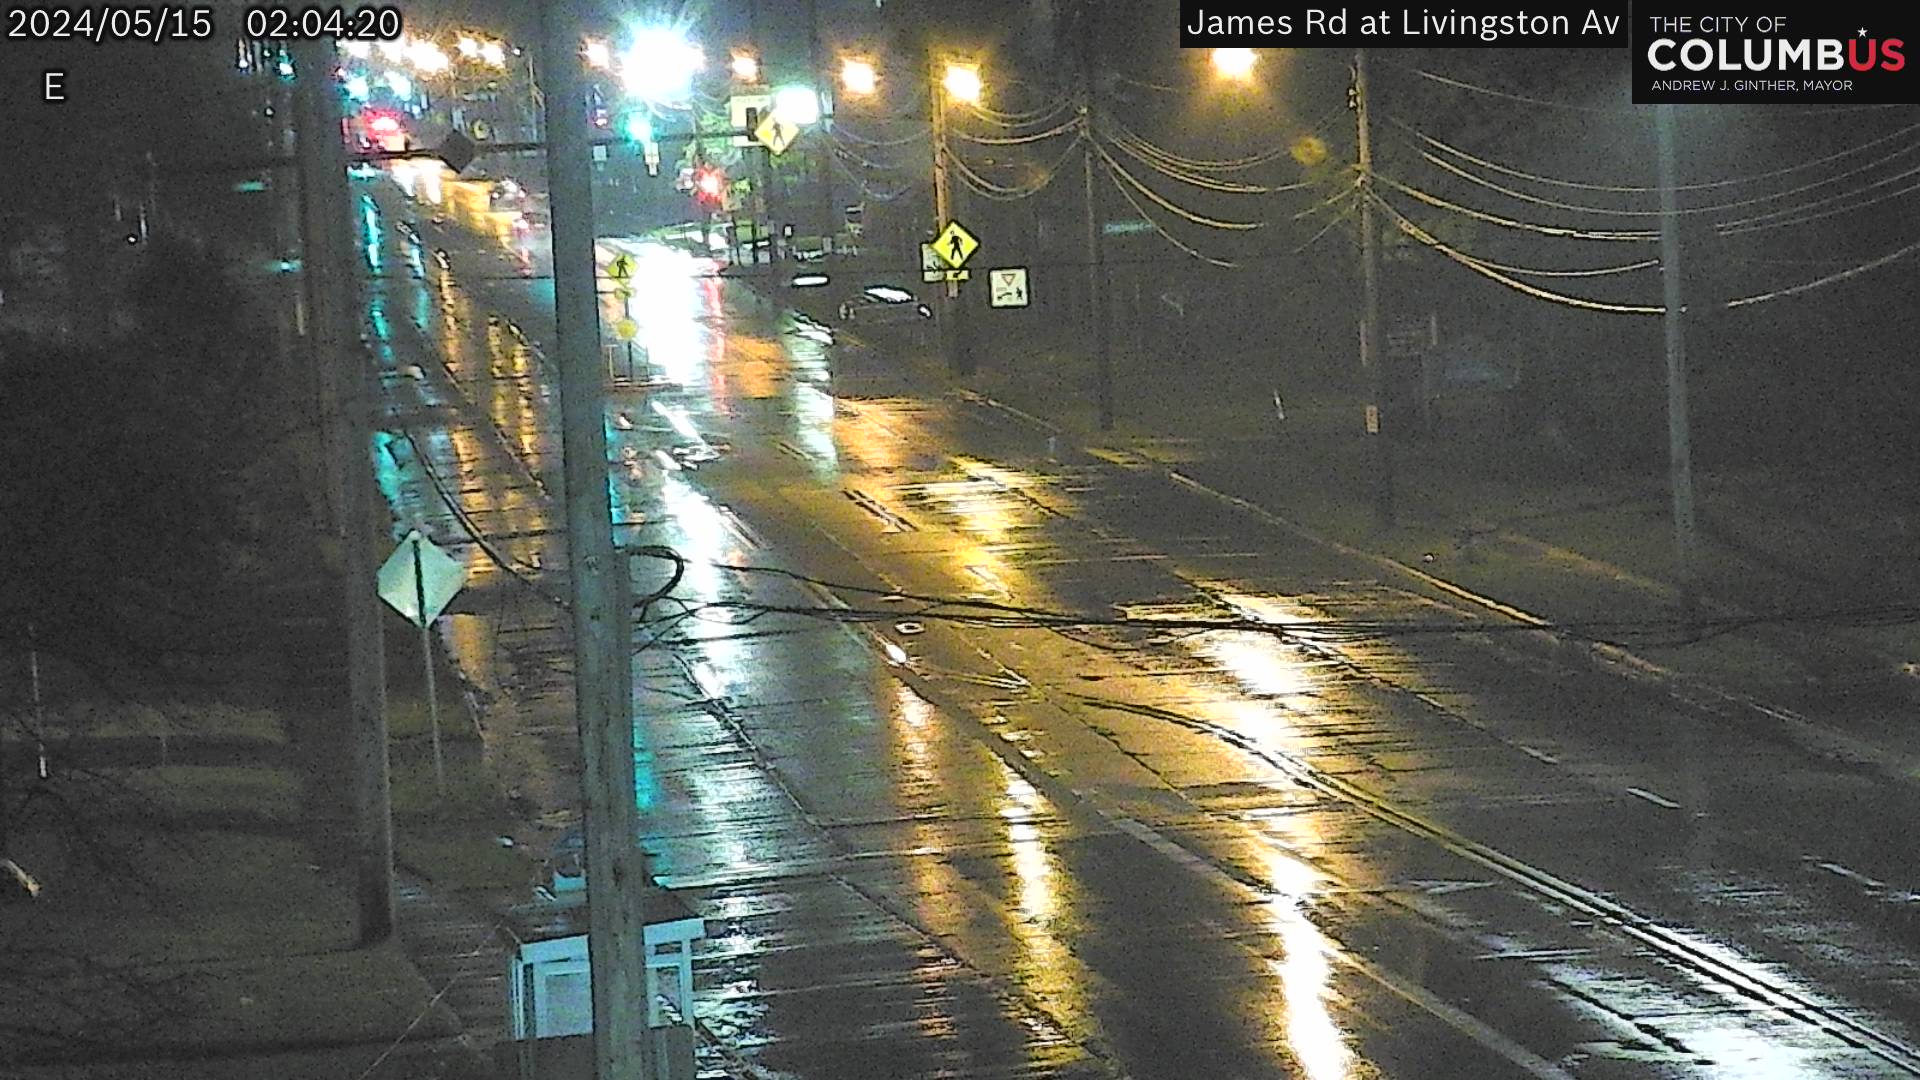 Traffic Cam James Rd at Livingston Ave Player